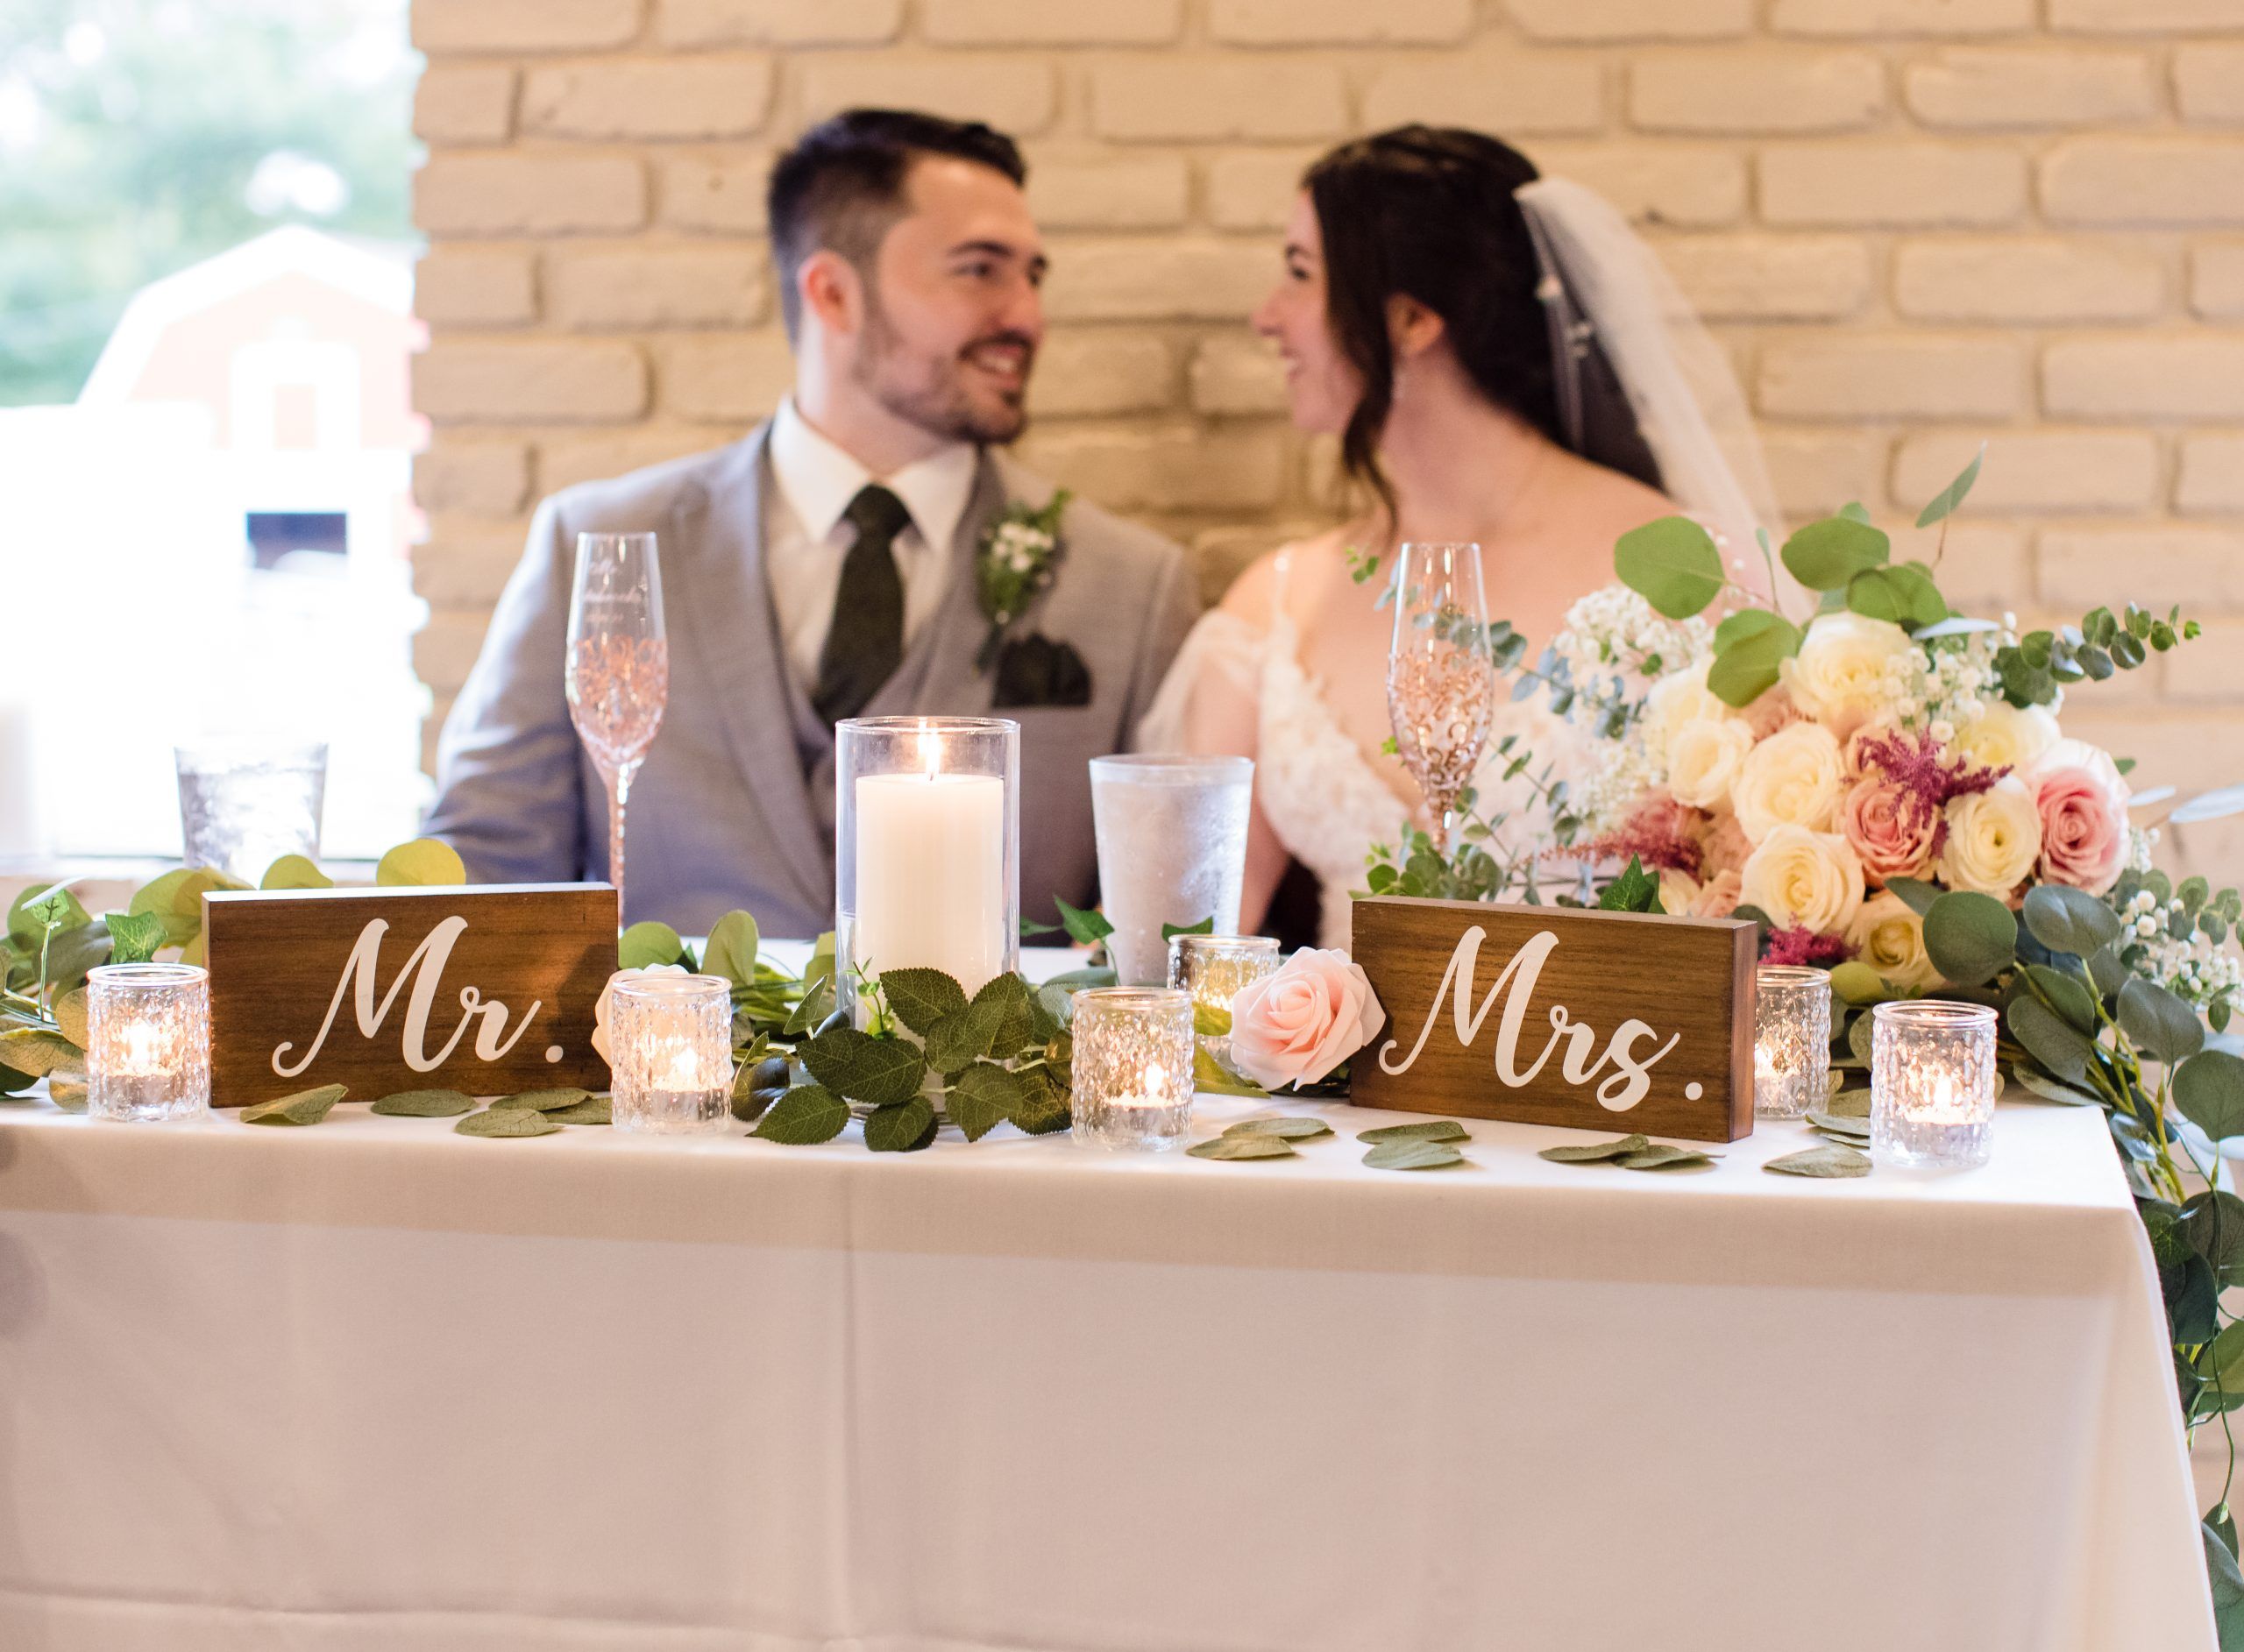 Bride and groom at sweetheart table.